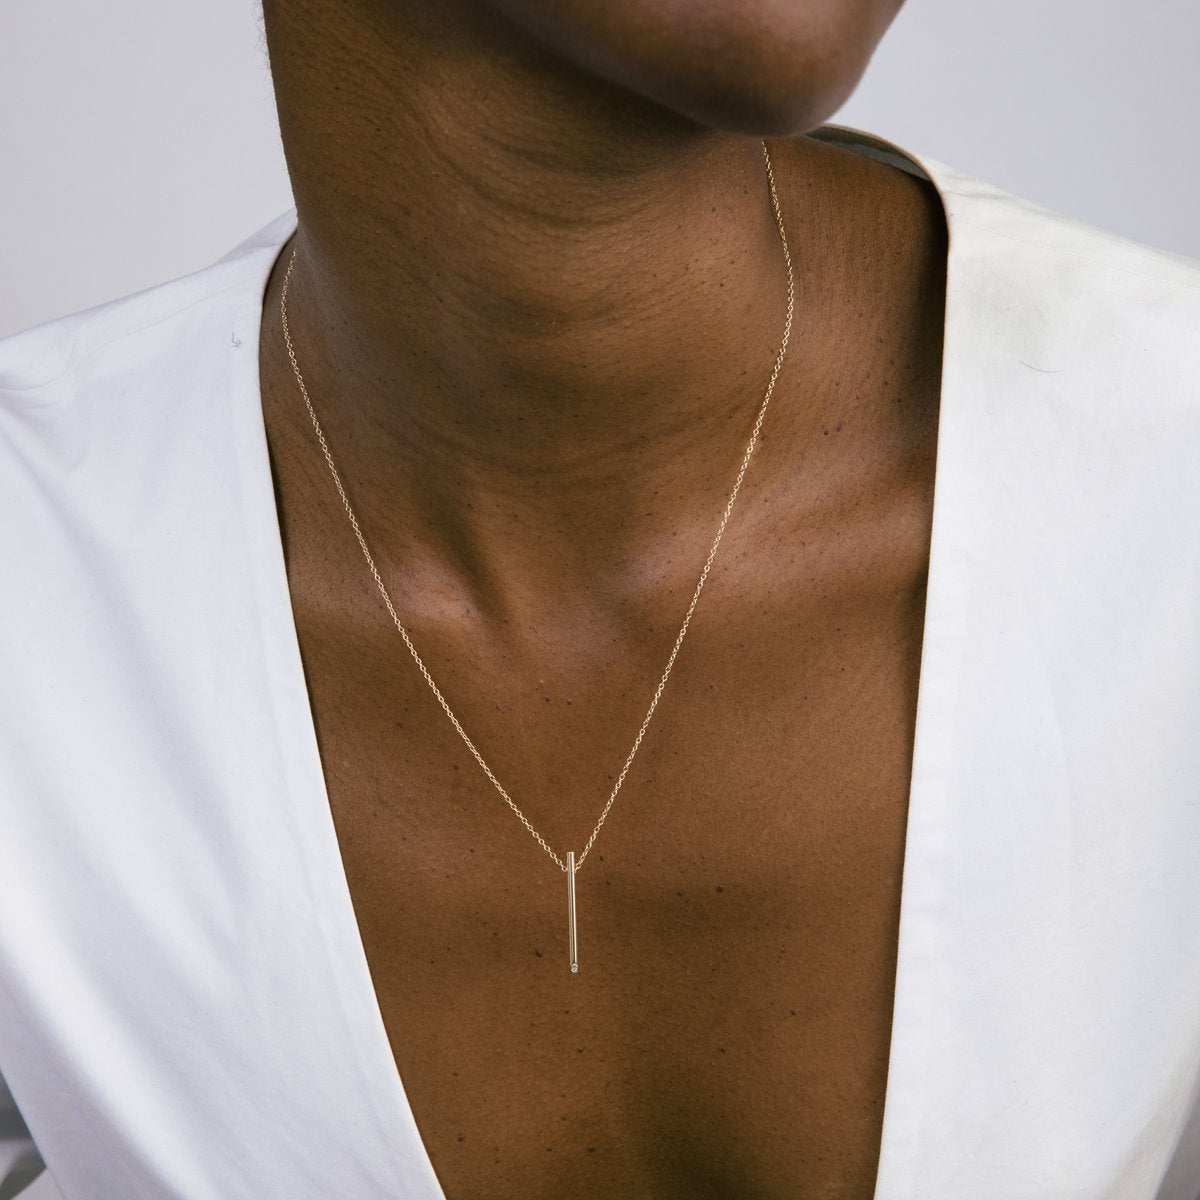 Ossu Simple Necklace in 14k Gold set with White Diamonds By SHW Fine Jewelry NYC